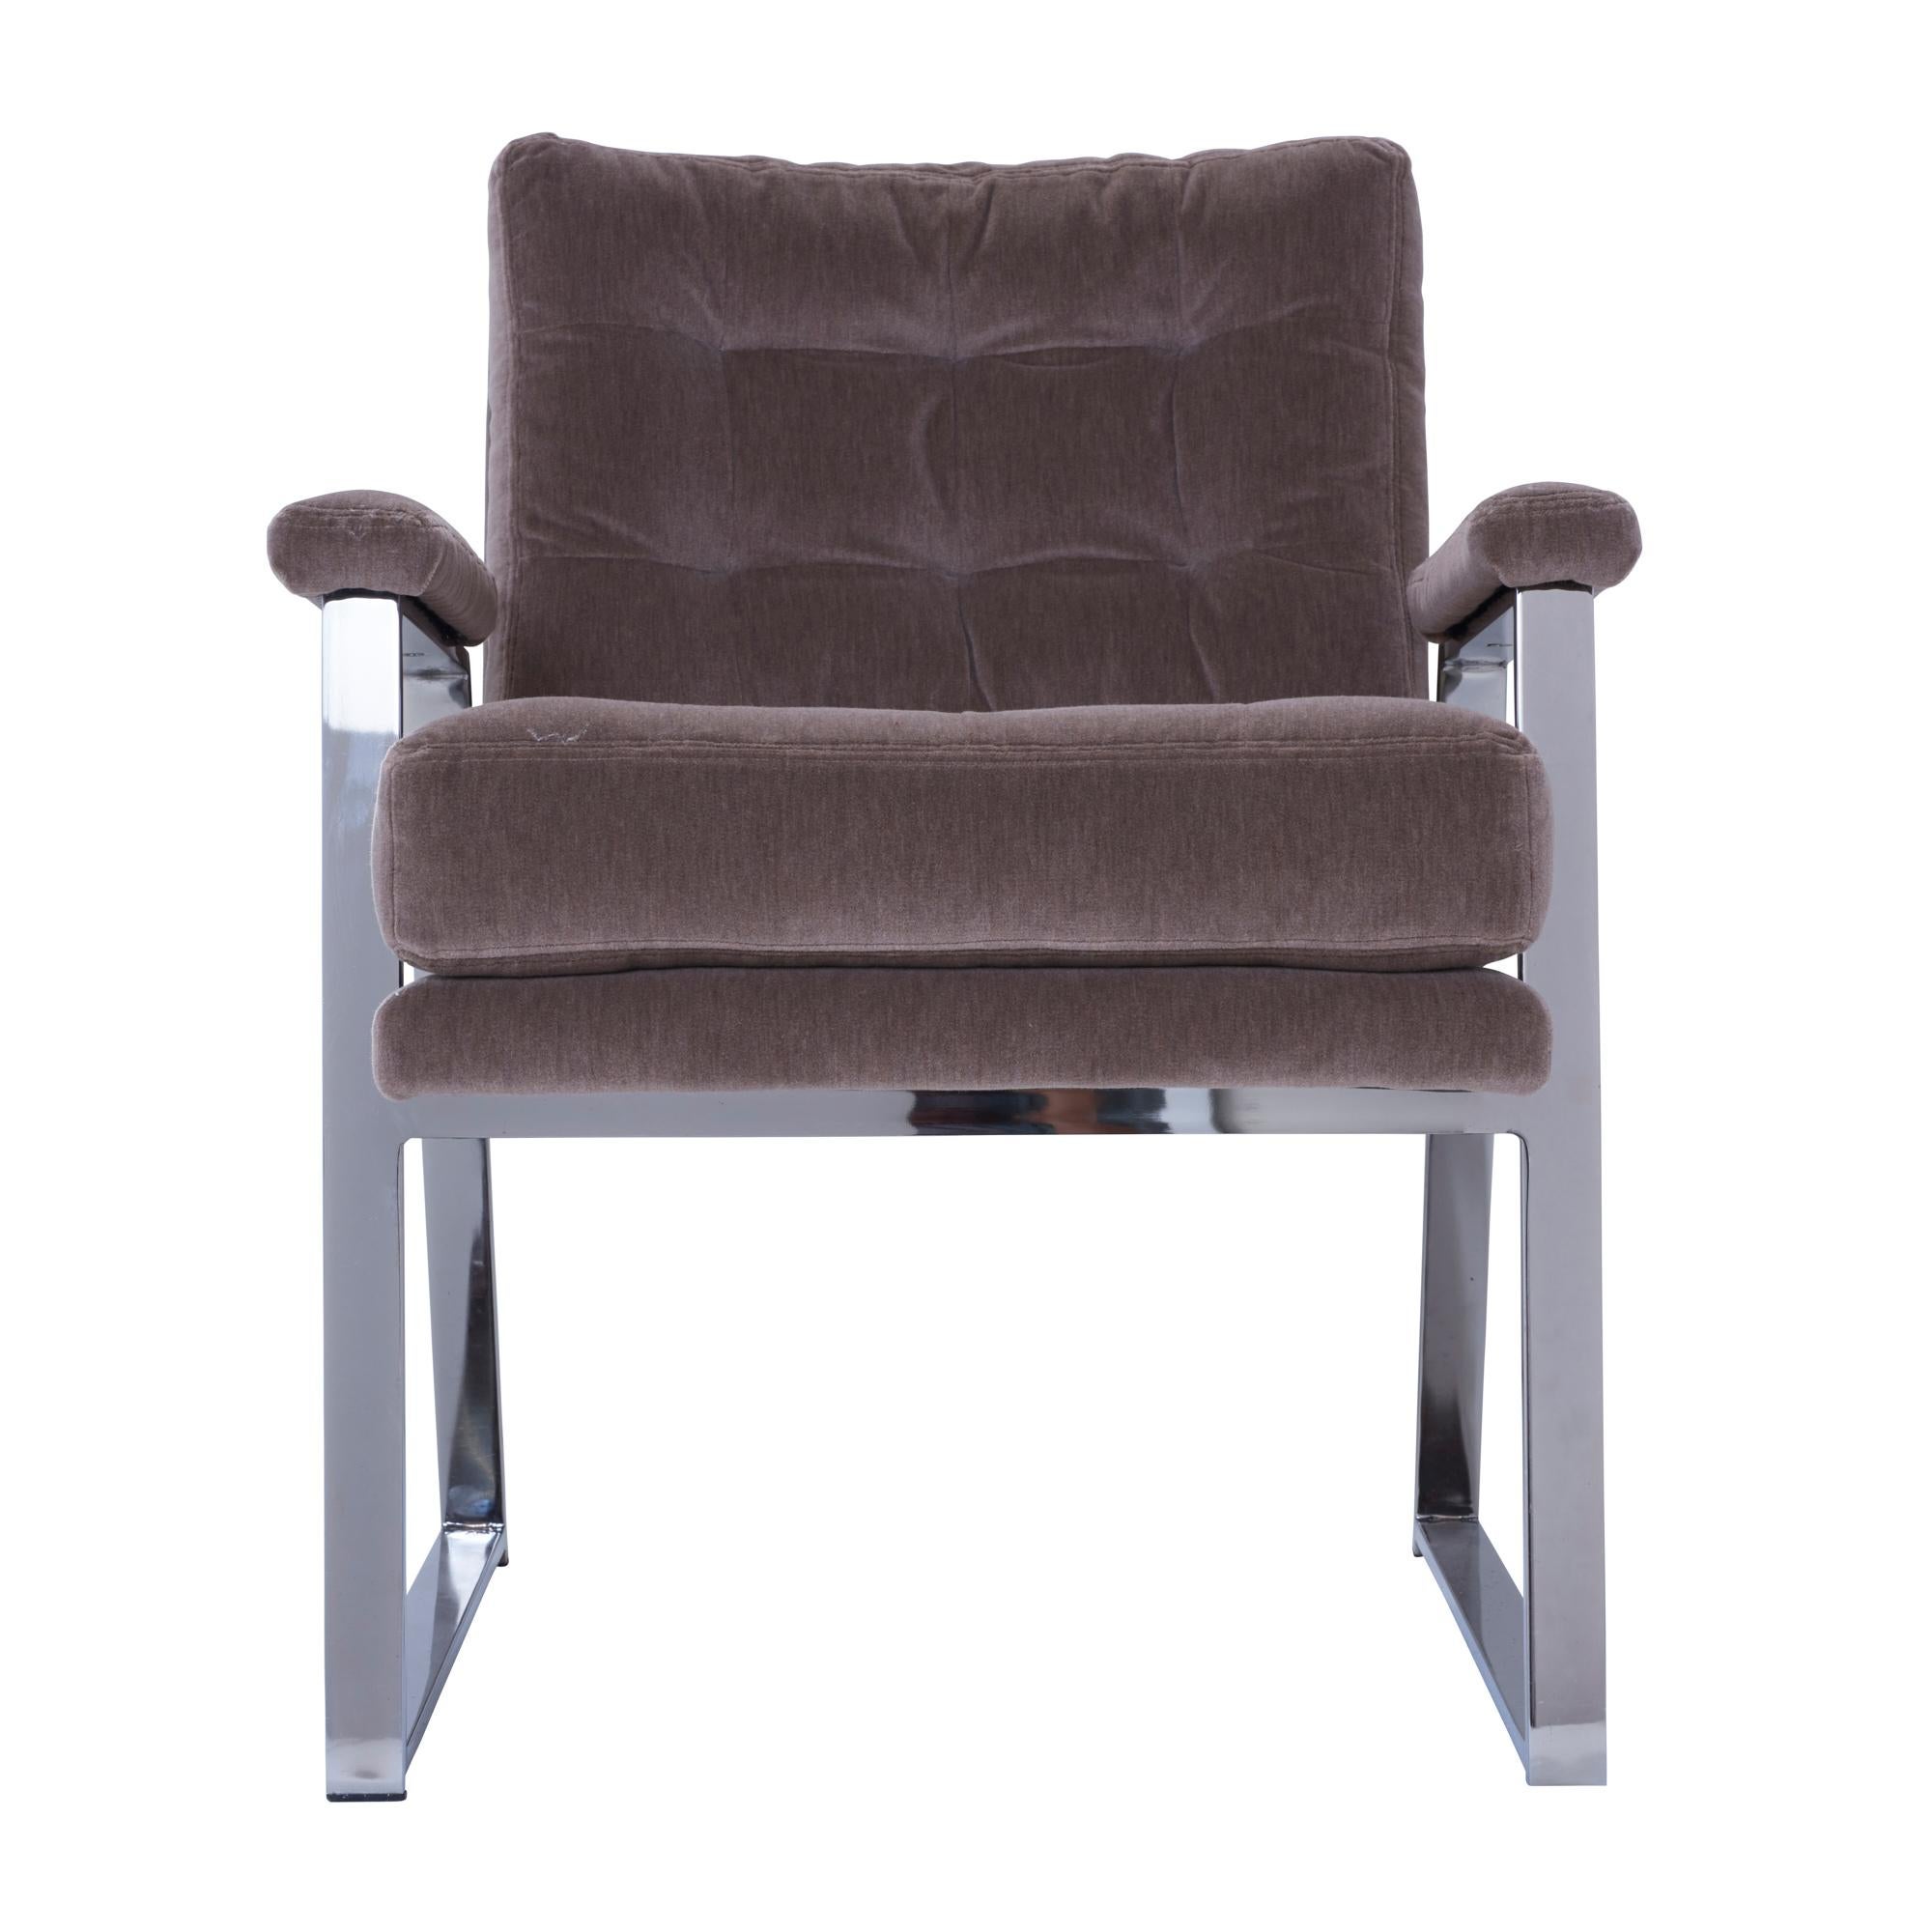 These vintage midcentury tufted chairs with a chrome base are newly upholstered in Schumacher's Jackson wool velvet (66733).

Since Schumacher was founded in 1889, our family-owned company has been synonymous with style, taste, and innovation. A